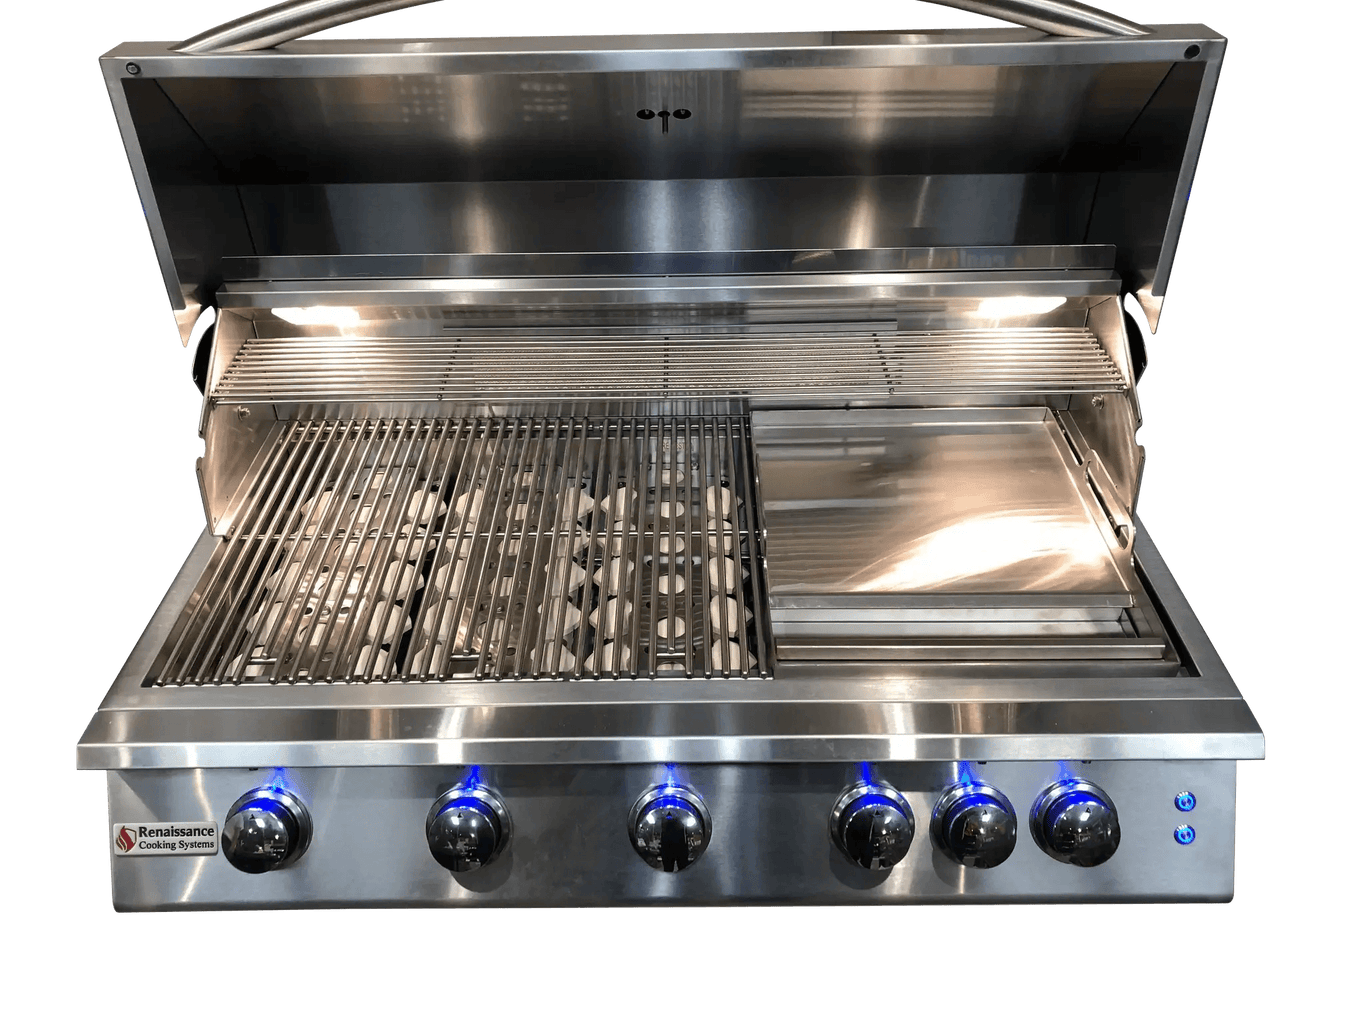 LeGriddle Dual Plate Stainless Steel and Cast Iron Griddle by Le Griddle, fits Premier Series(RJC) Grills RSSG3 Grilling Accessoires Topture